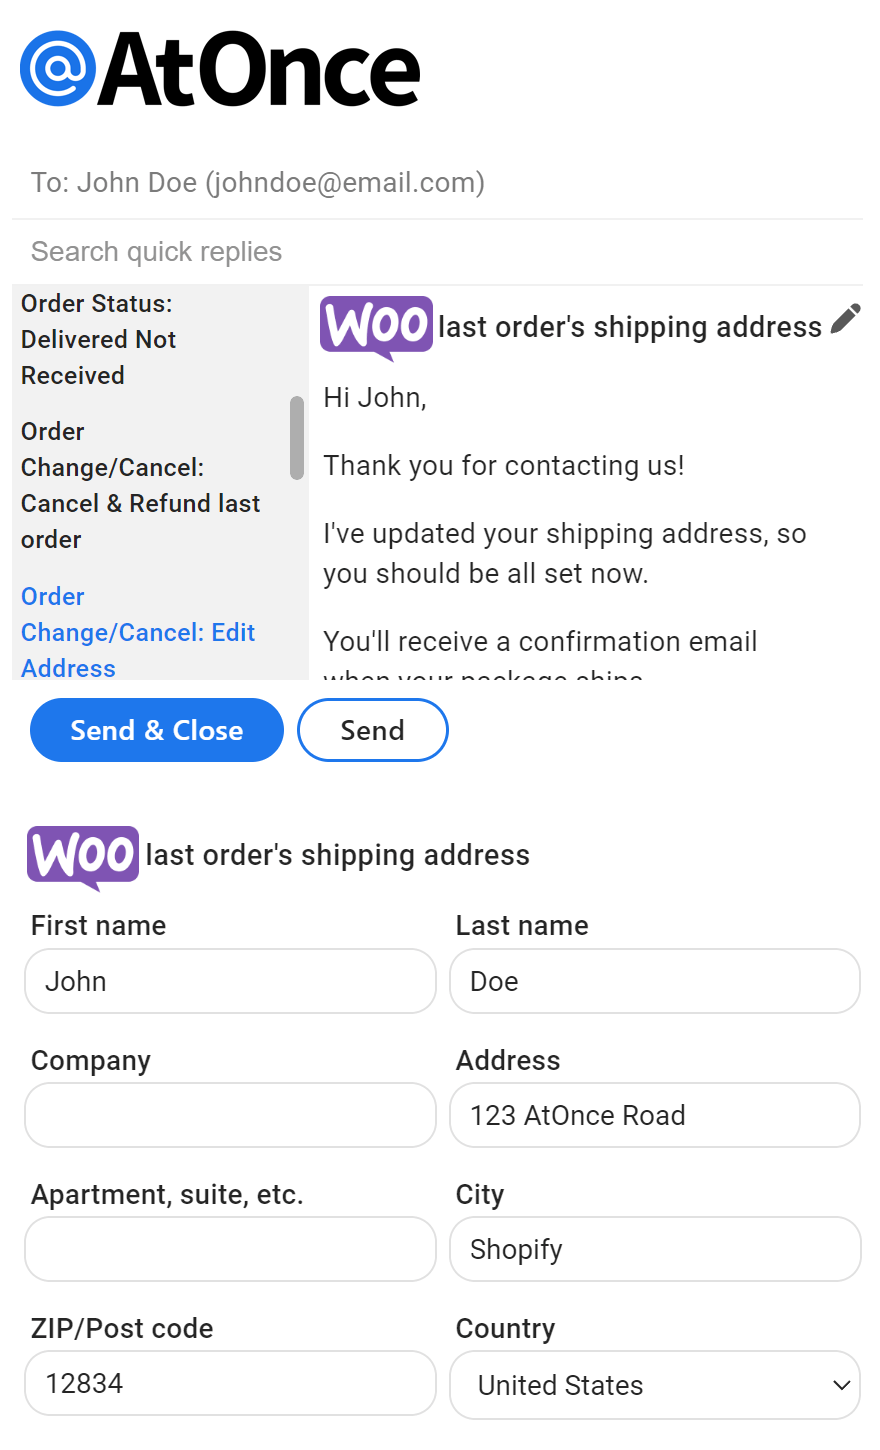 AtOnce WooCommerce app